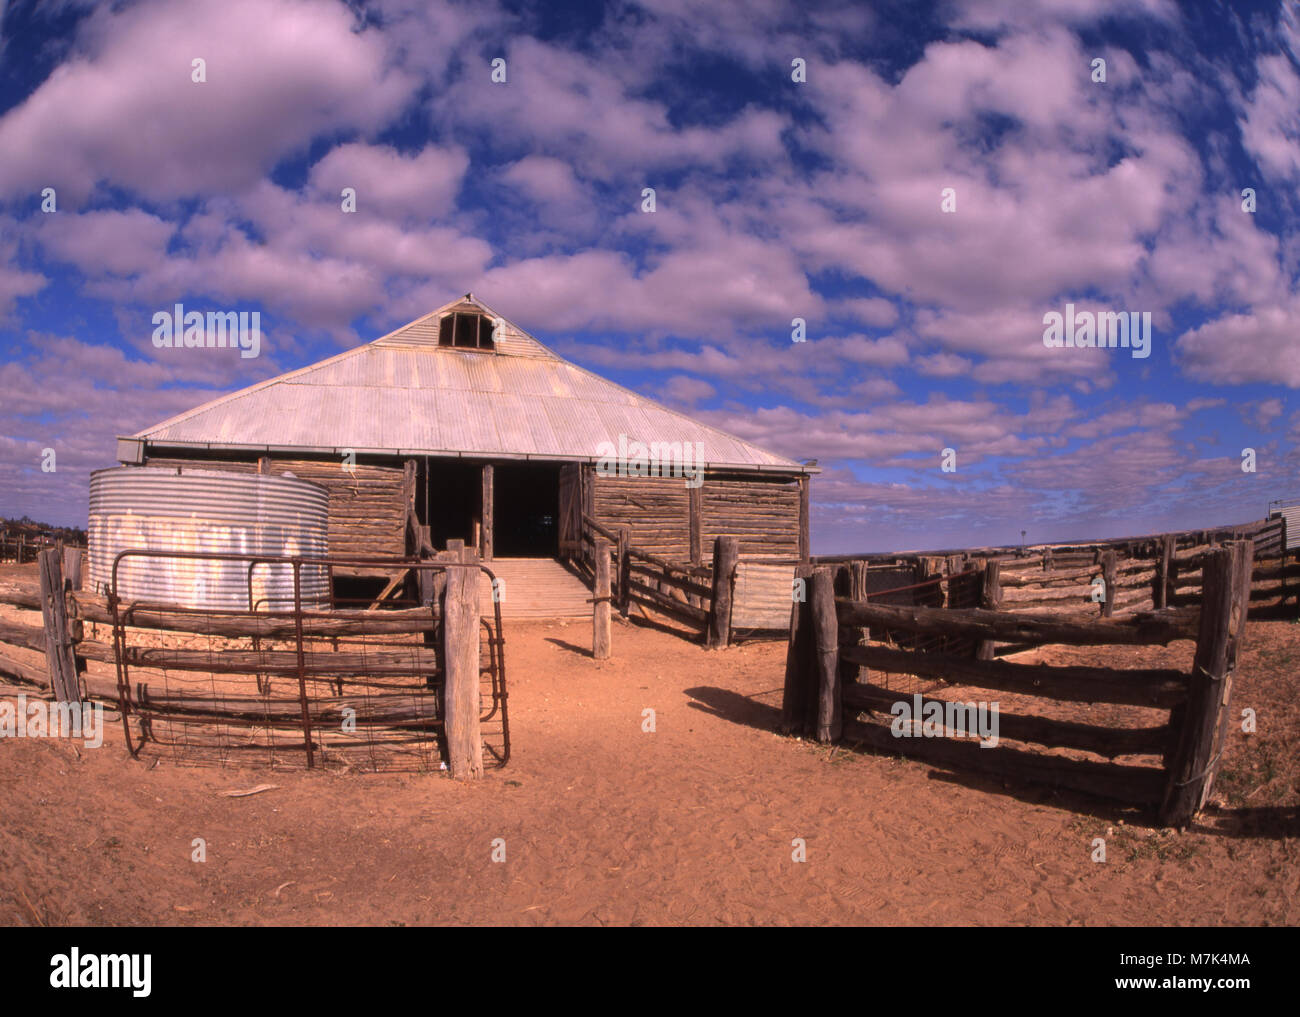 Mungo Woolshed, built in 1869, is an ingenious drop-log cypress pine construction from the historic Gol Gol pastoral station, now in Mungo NP. Stock Photo